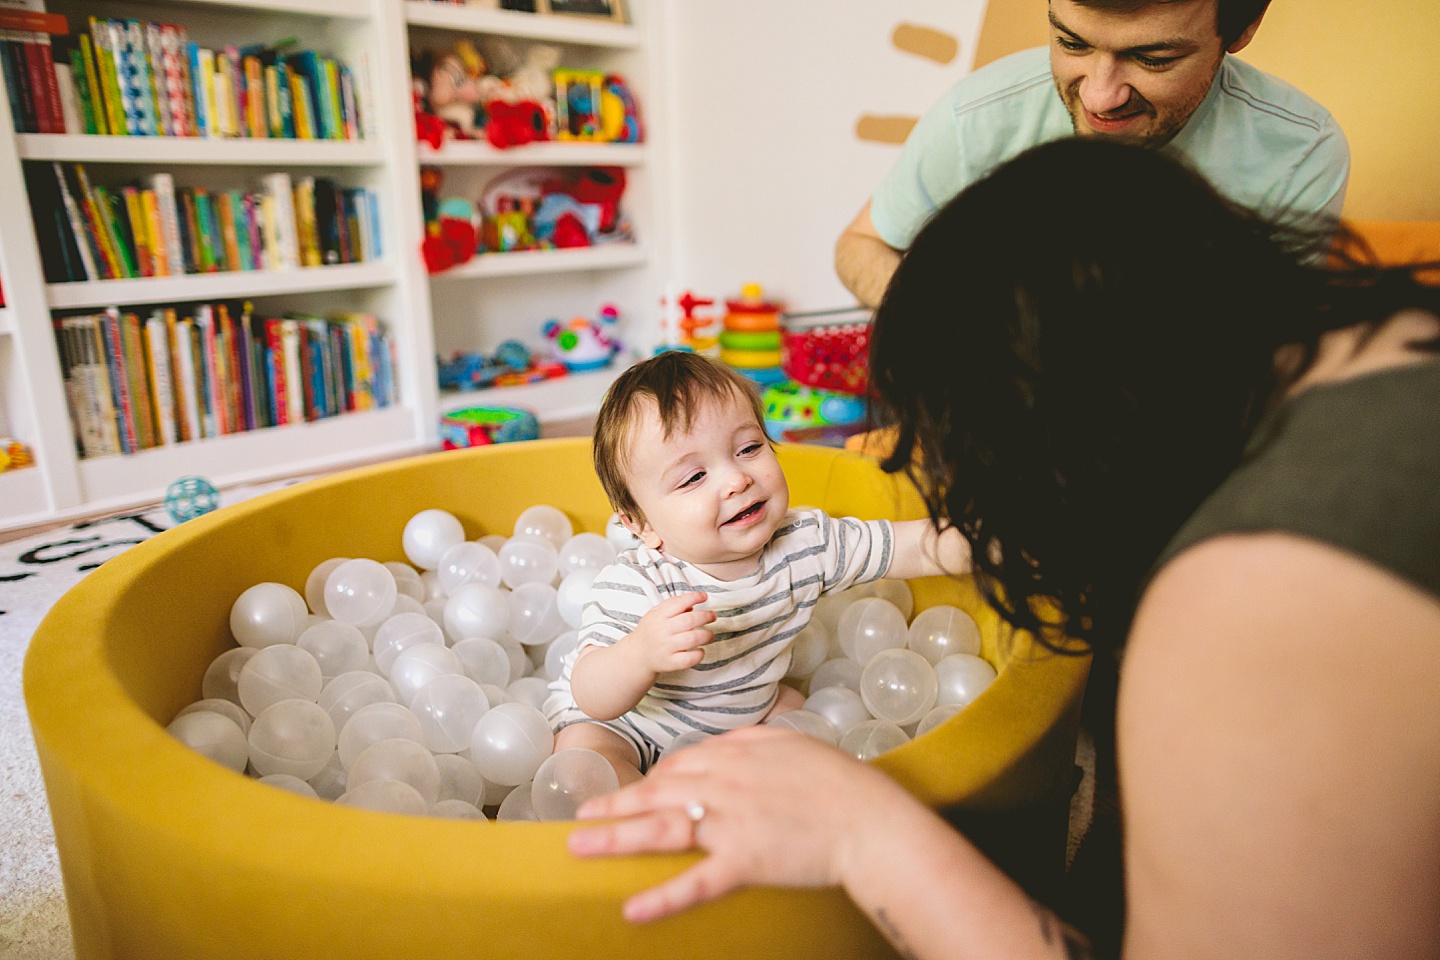 Baby playing in ball pit